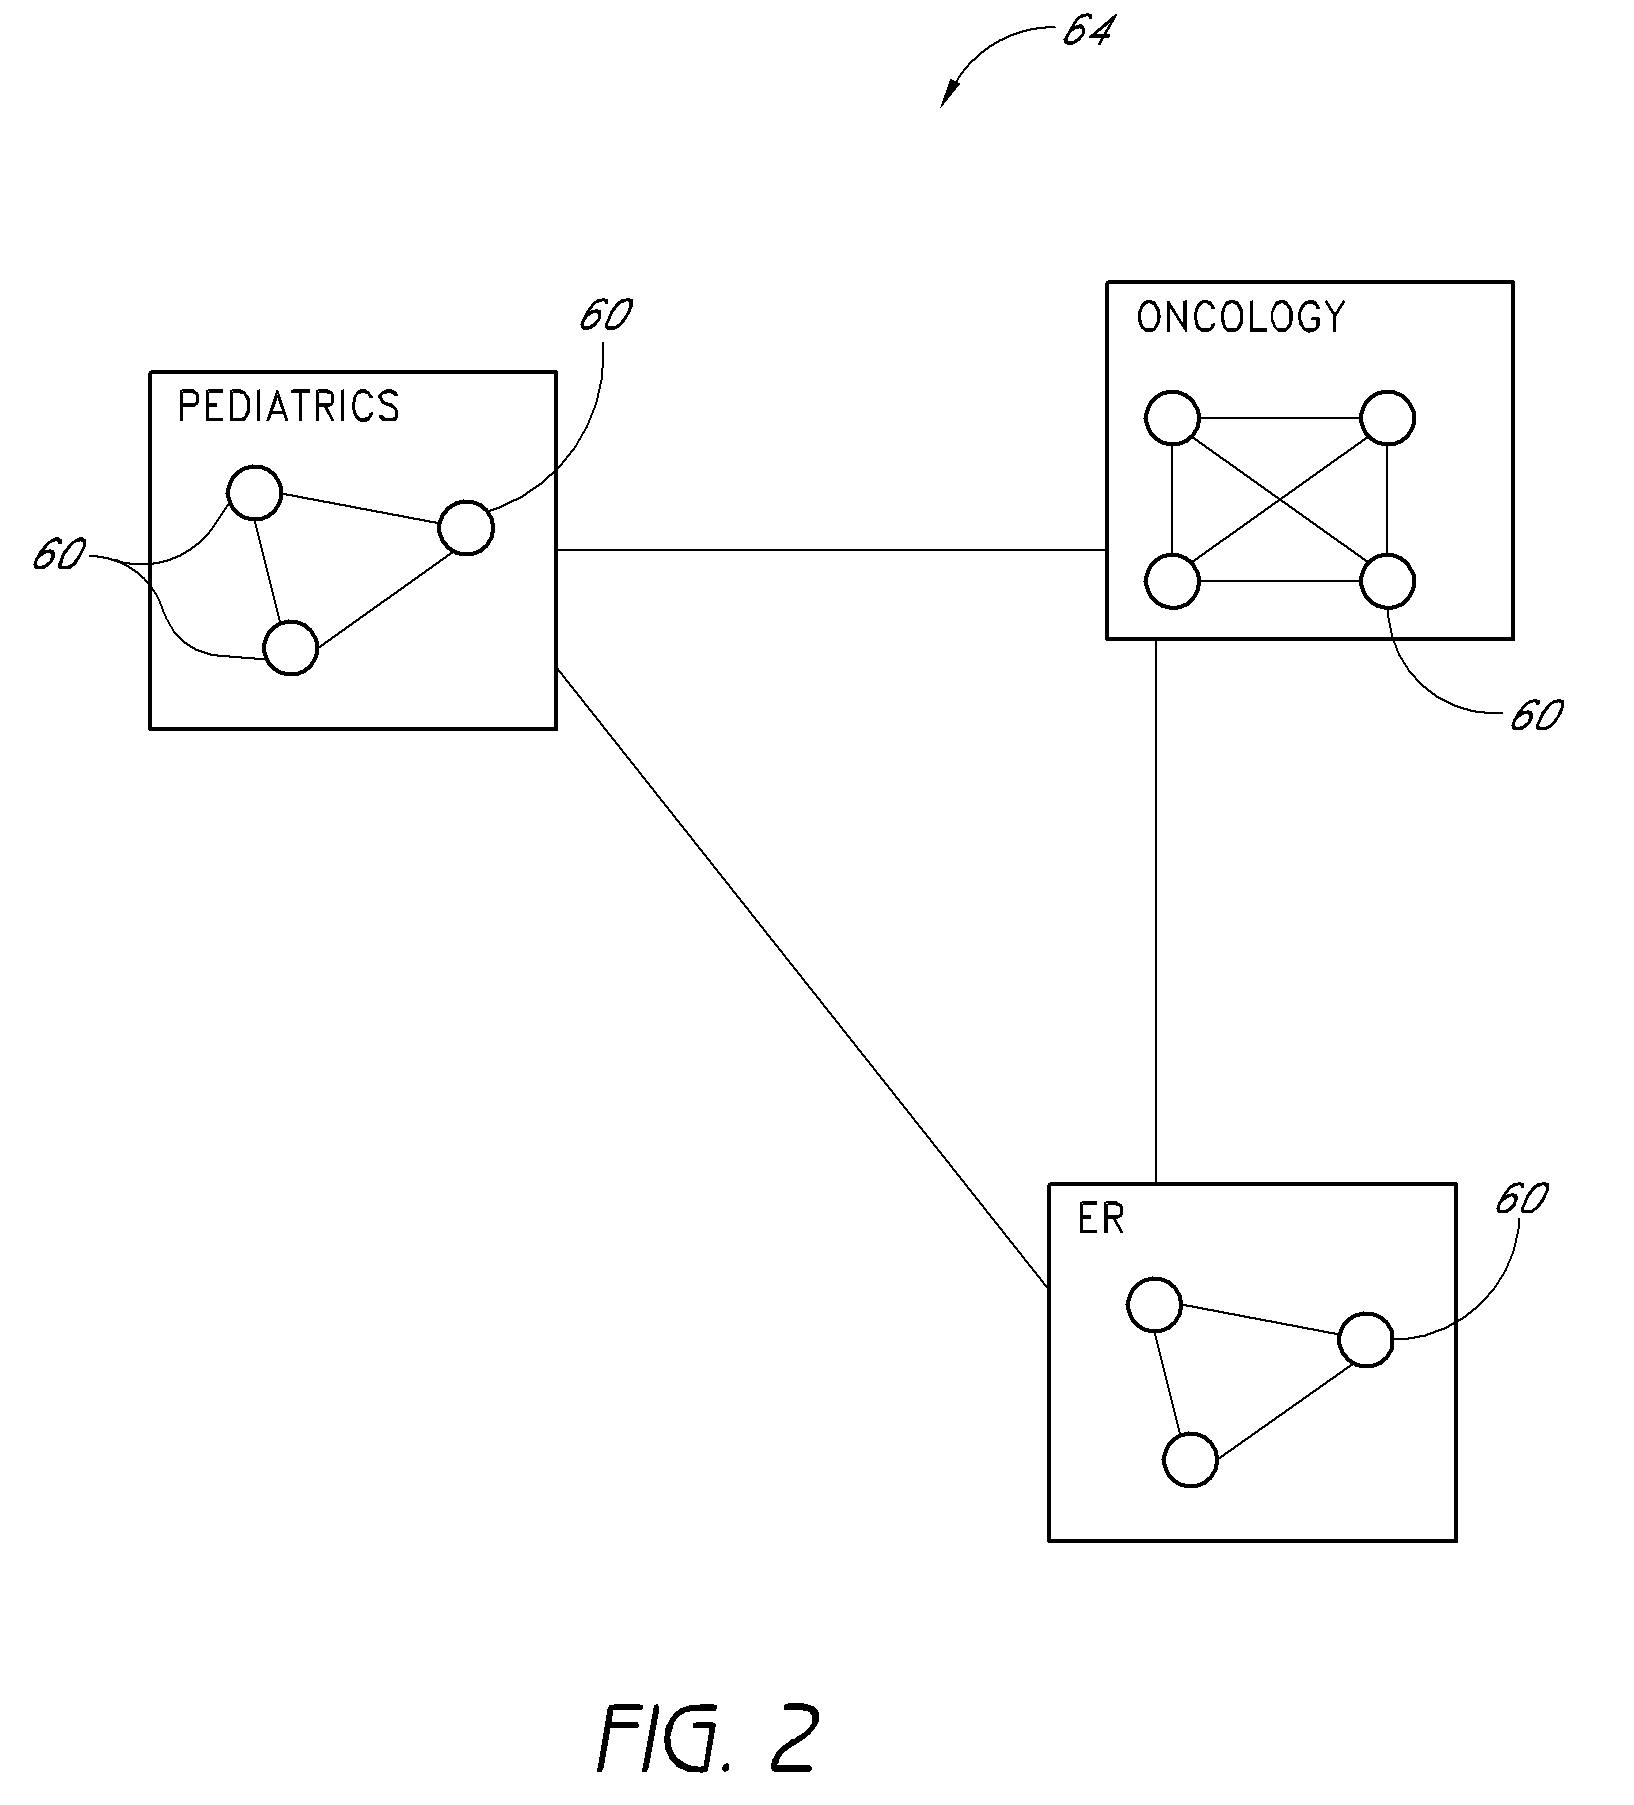 Method for Combined Disposal and Dispensing of Medical Items